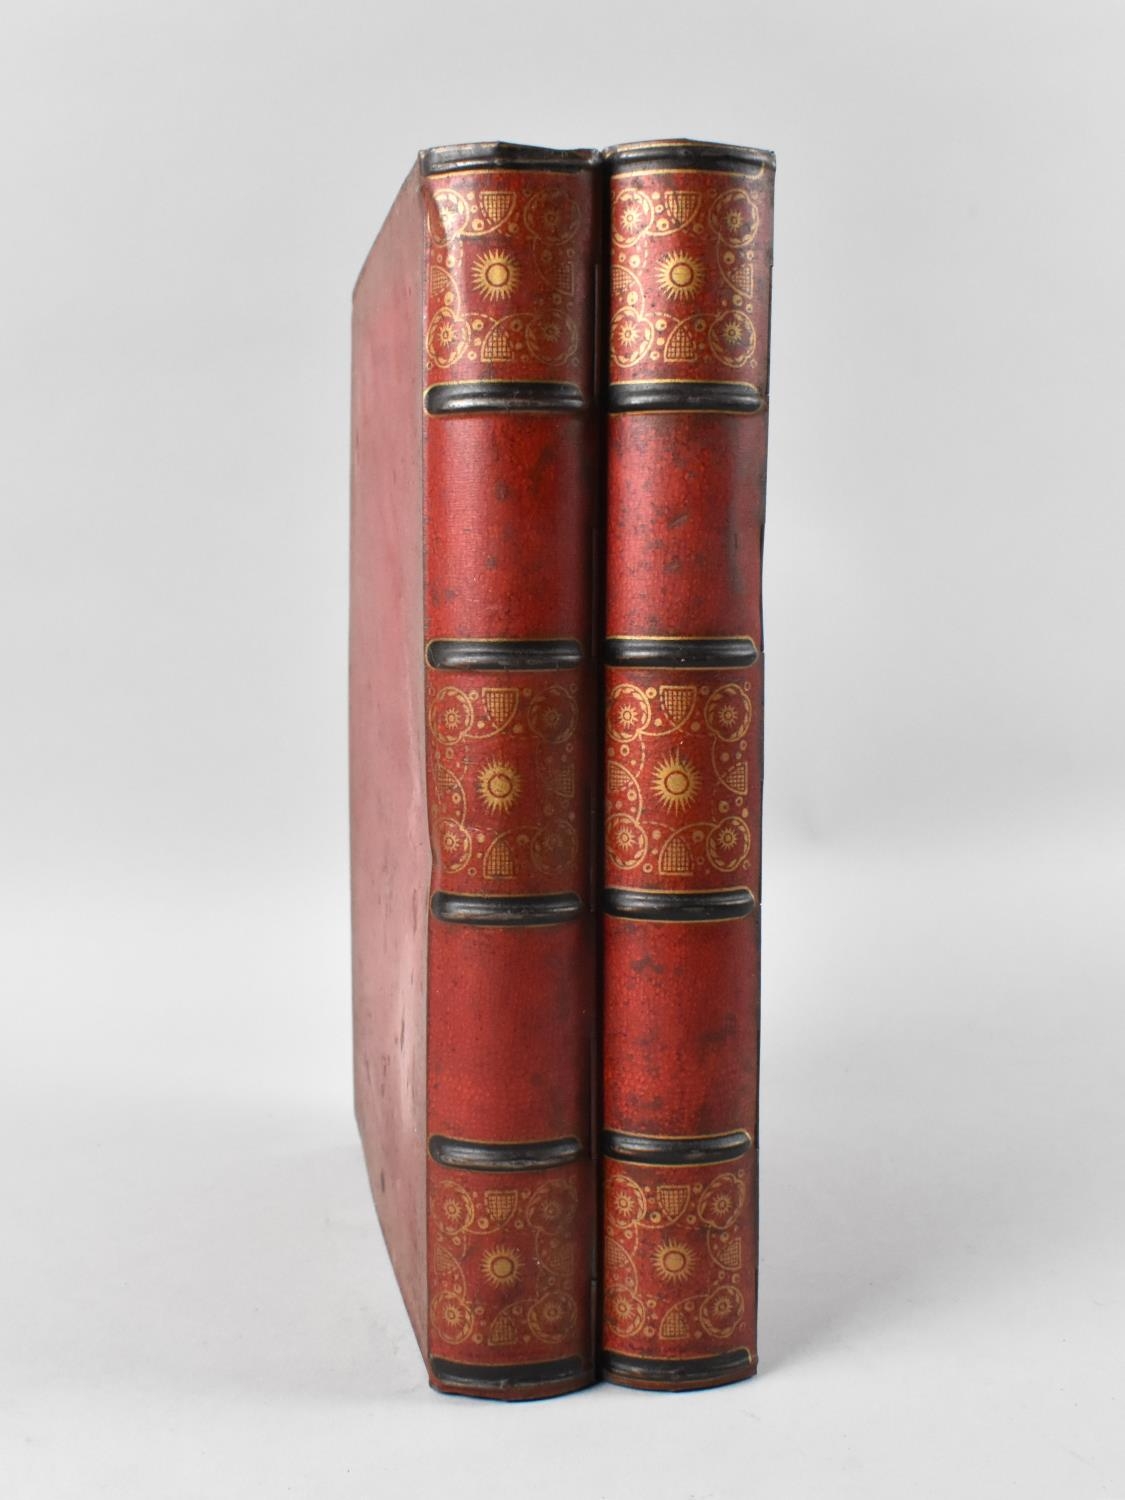 A Pair of Huntley and Palmer Biscuit Tins in the Form of Tooled Leather Bound Books, Issued 1924, - Image 3 of 4